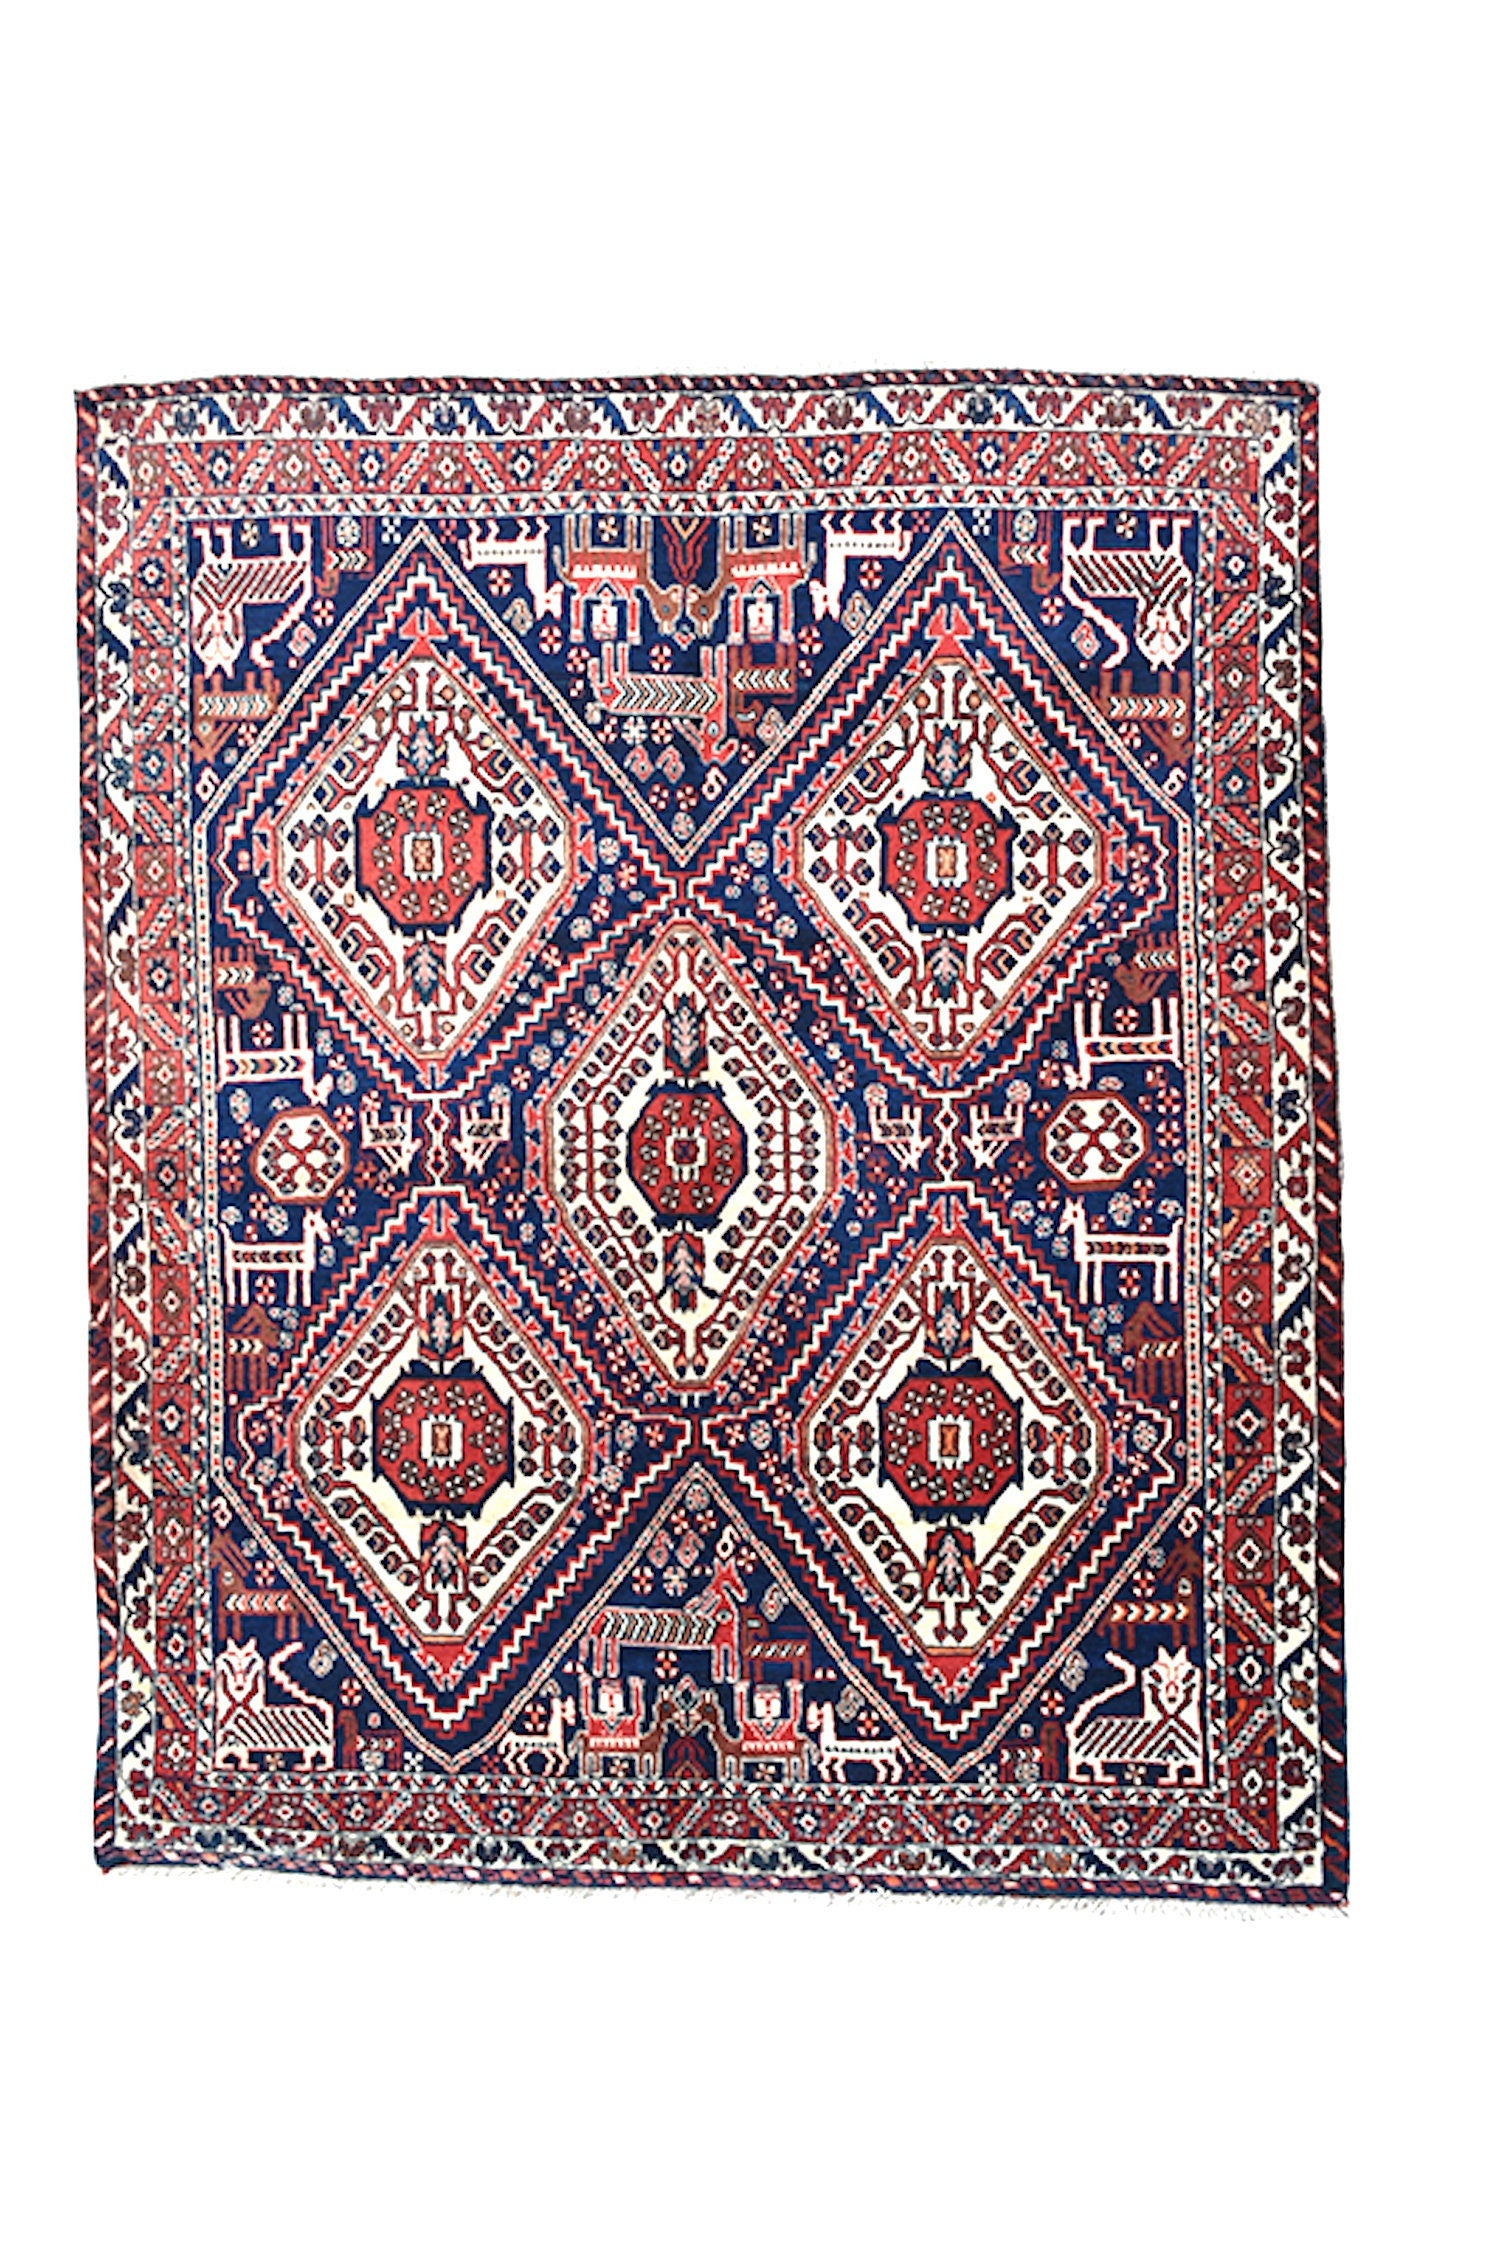 Navy Vintage Rug | Geometric Tribal Rug | Red and Blue Hand Knotted Rug | 4 x 6 Area Rug | Bohemian Decor | Wool Authentic Rug